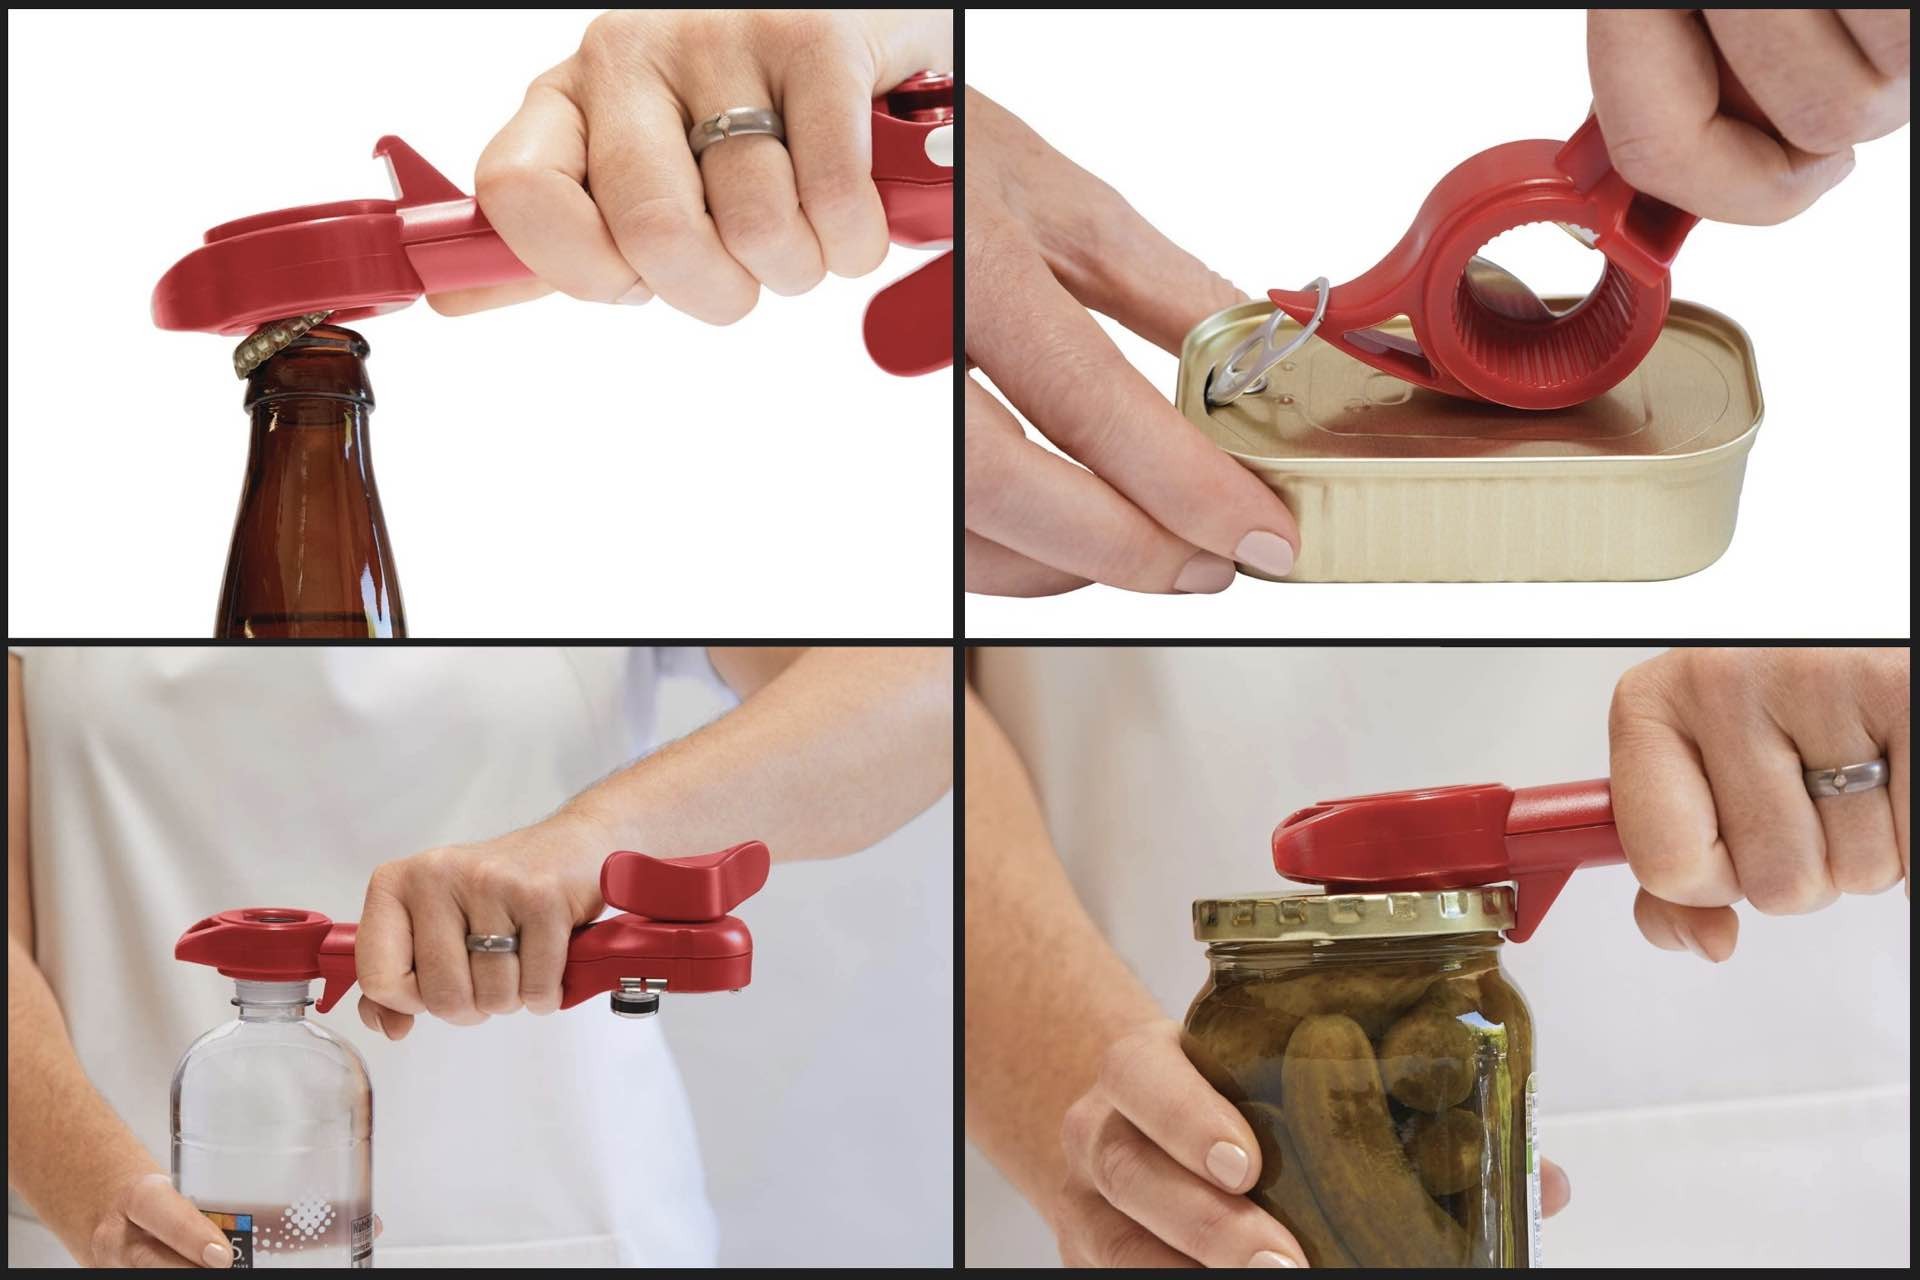 kuhn-rikon-auto-safety-master-can-bottle-opener-in-use